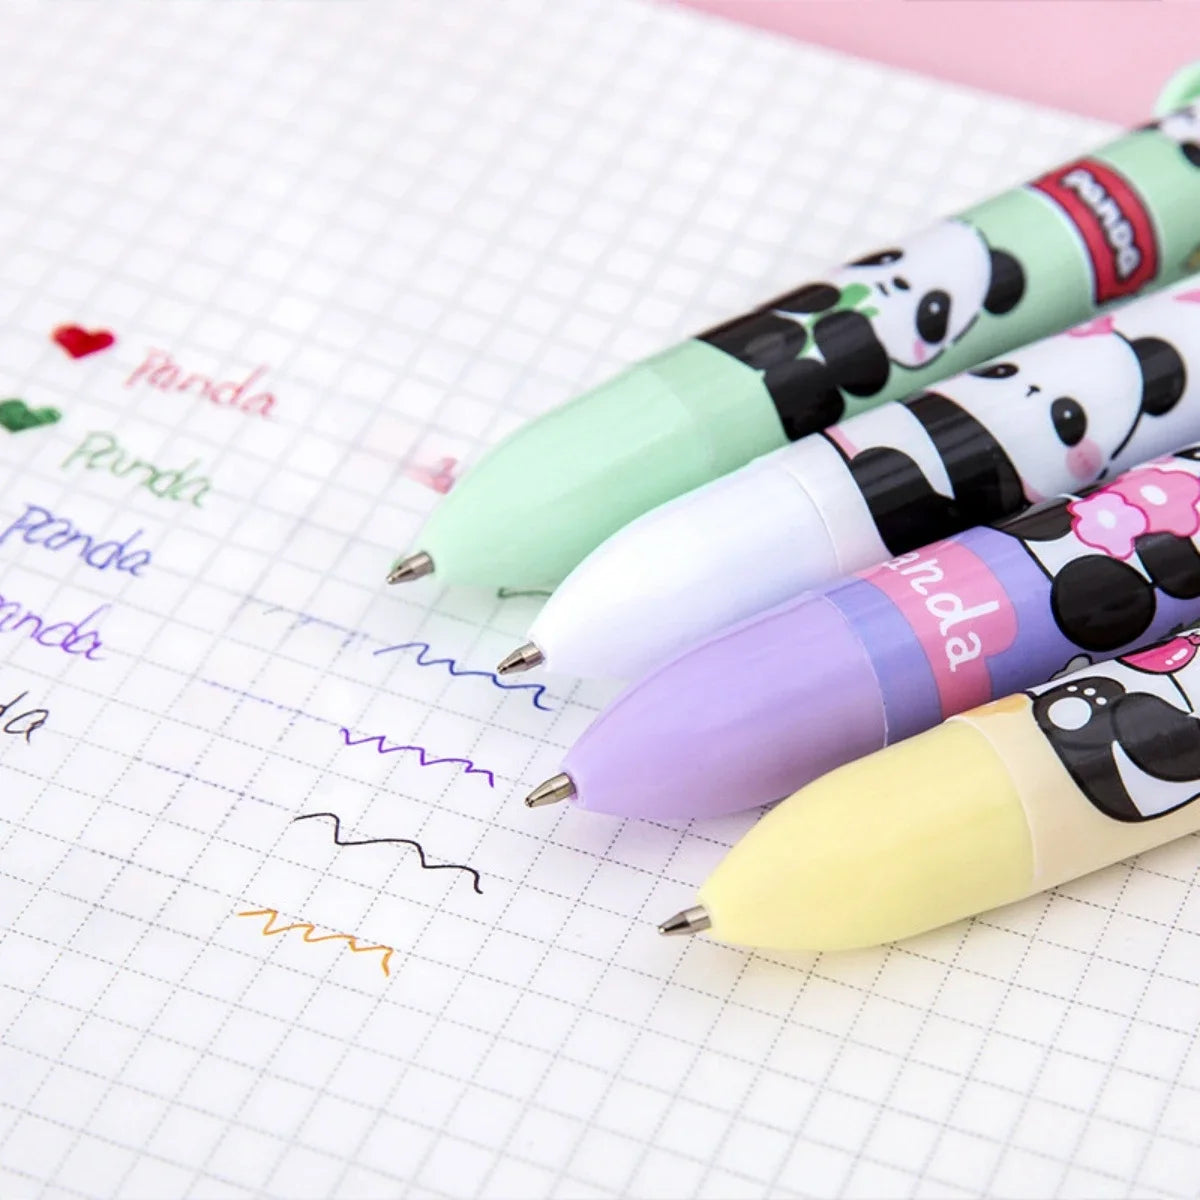 4 pcs/lot Kawaii Panda 6 Colored Mechanical Ballpoint Pen for Students School Office Writing Supplies Gift Stationery Ball Point